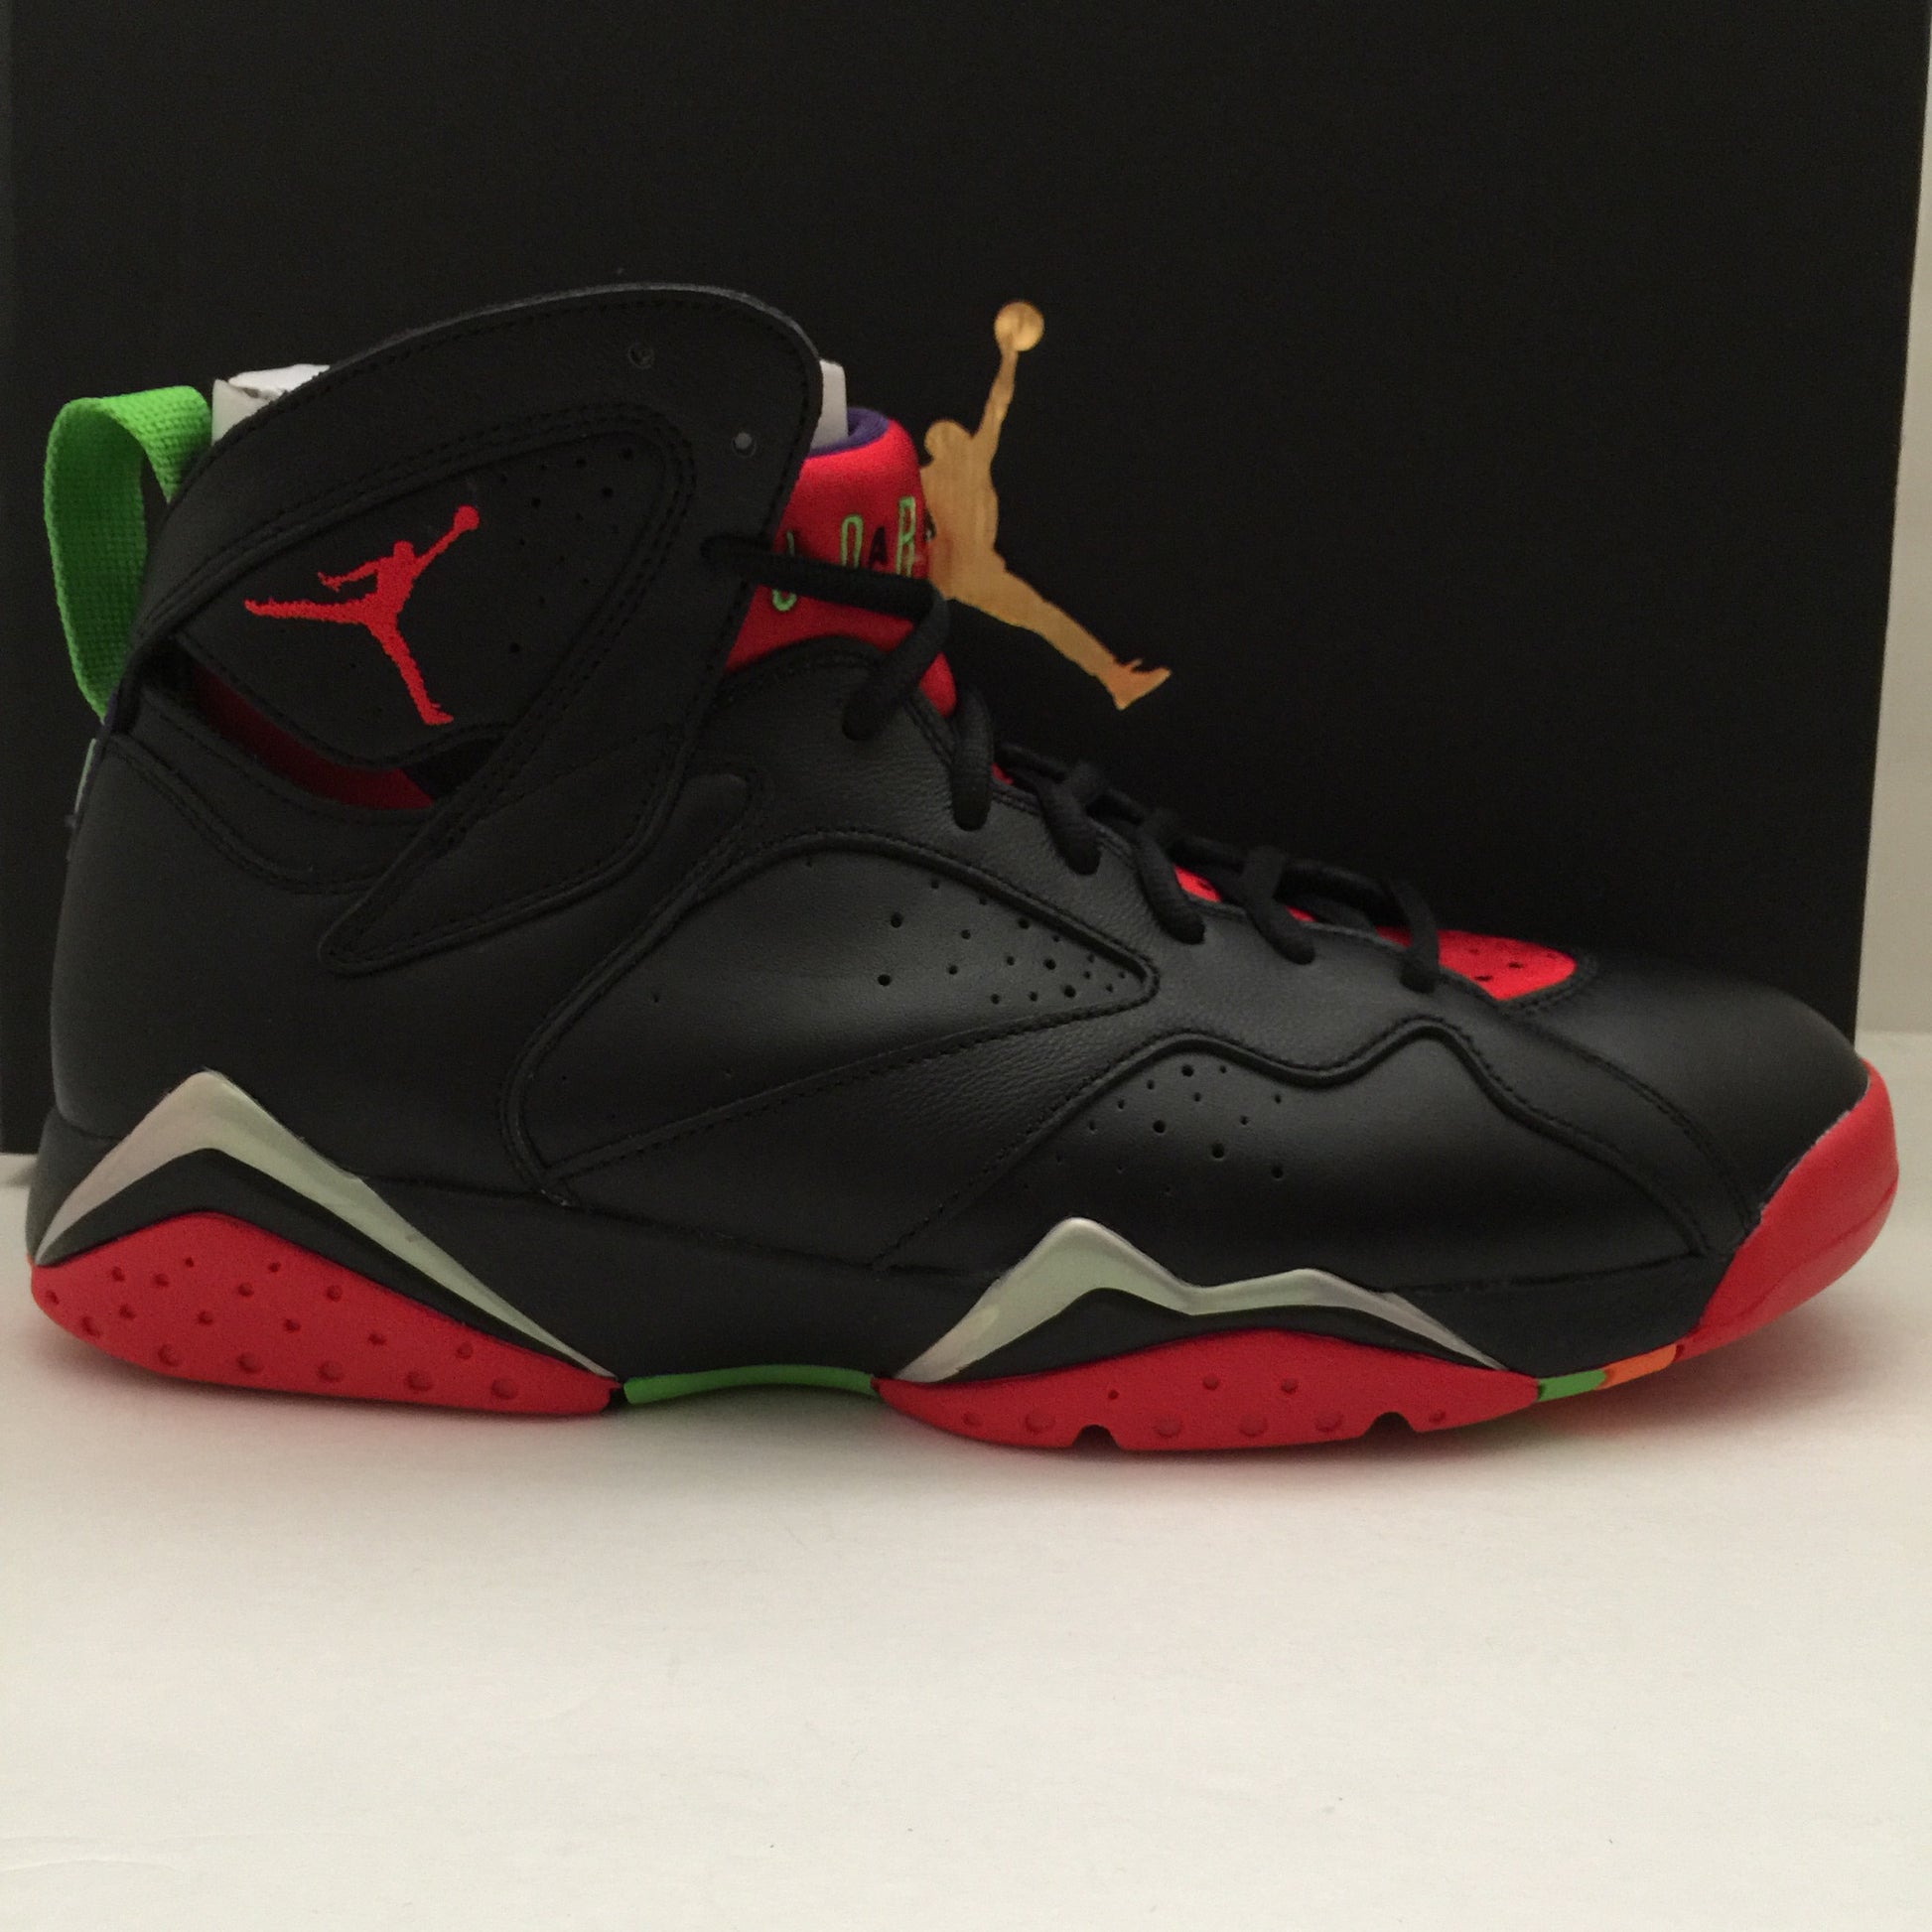 DS Nike Air Jordan 7 Retro Marvin The Martian Size 9.5/Size 10 - DOPEFOOT
 - 1